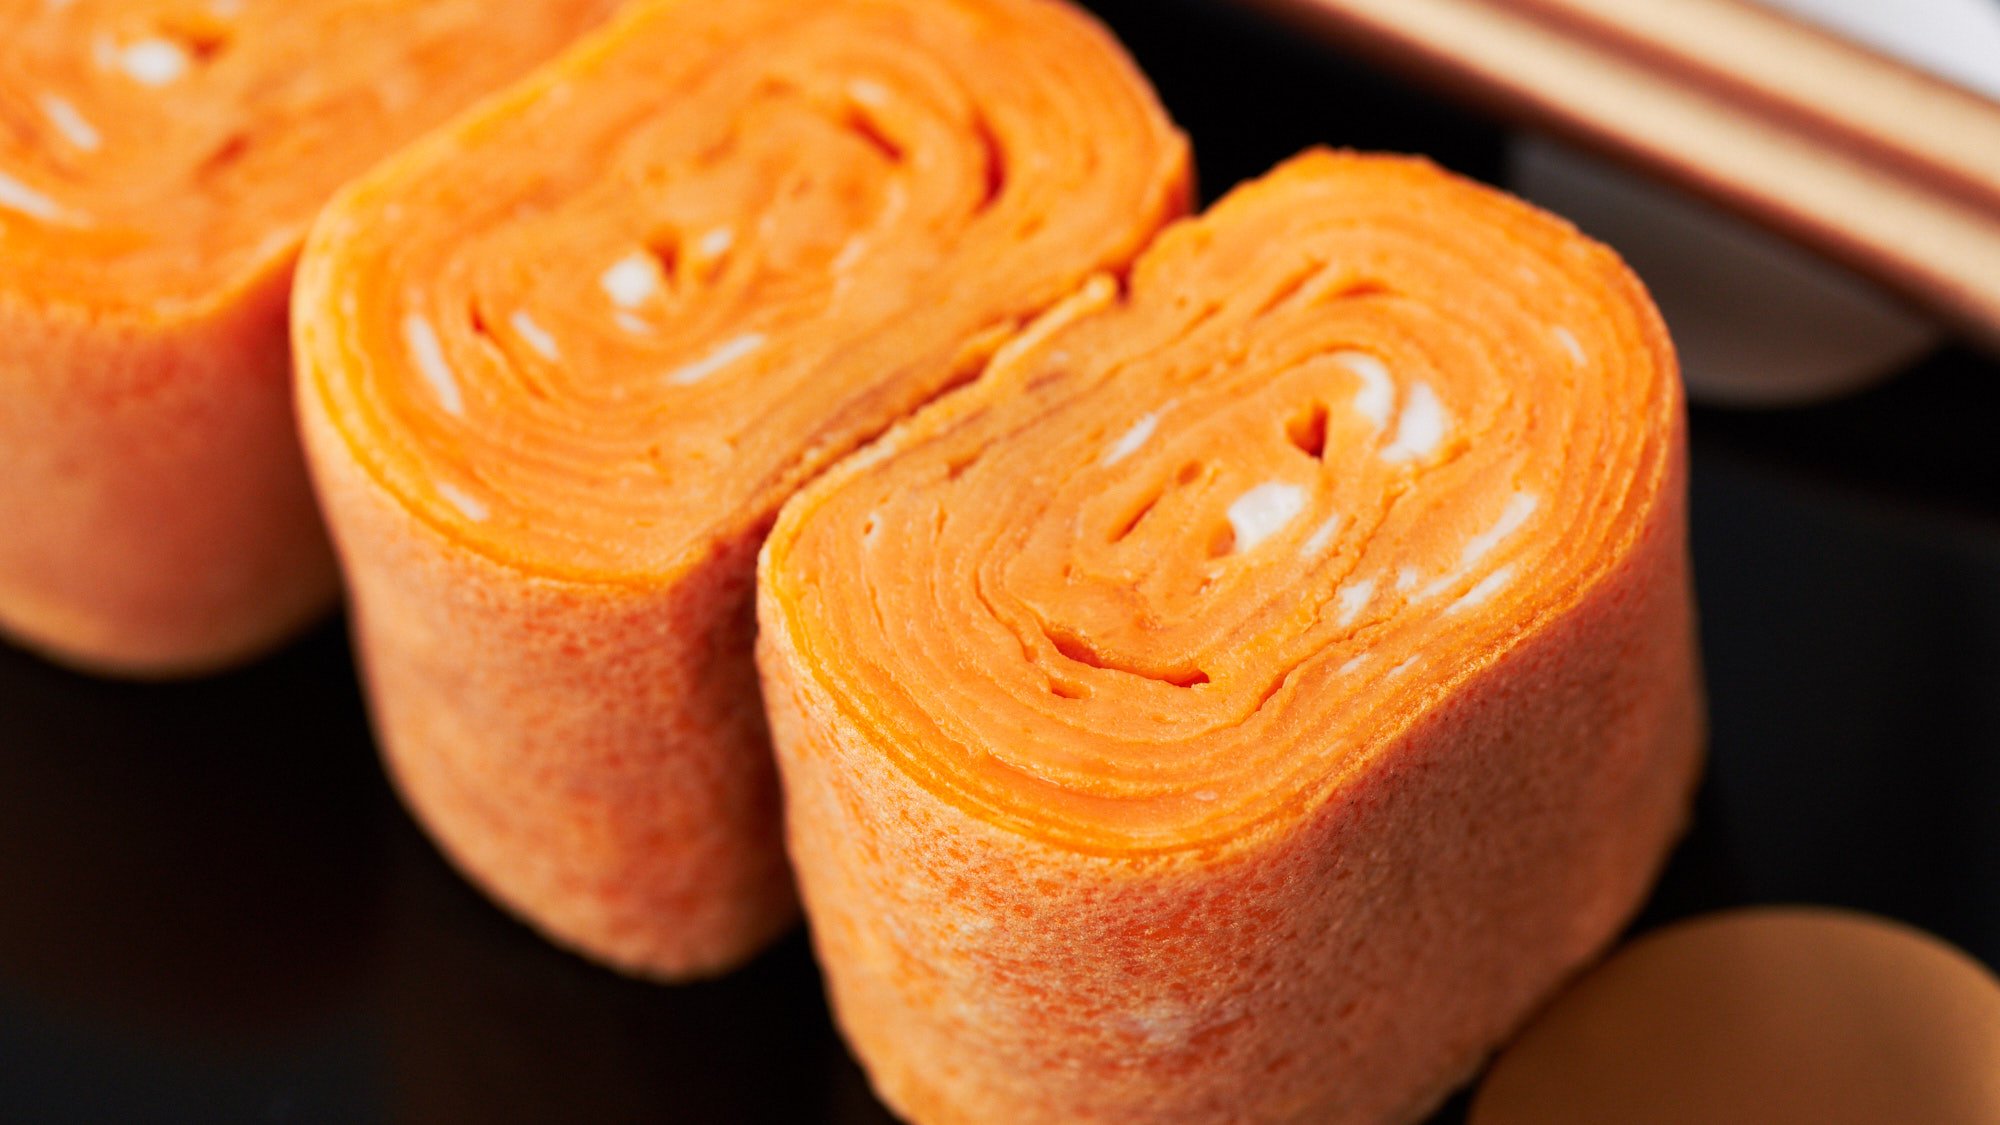 Tamagoyaki is a layered Japanese omelette made by rolling thin sheets of seasoned egg into a roll.